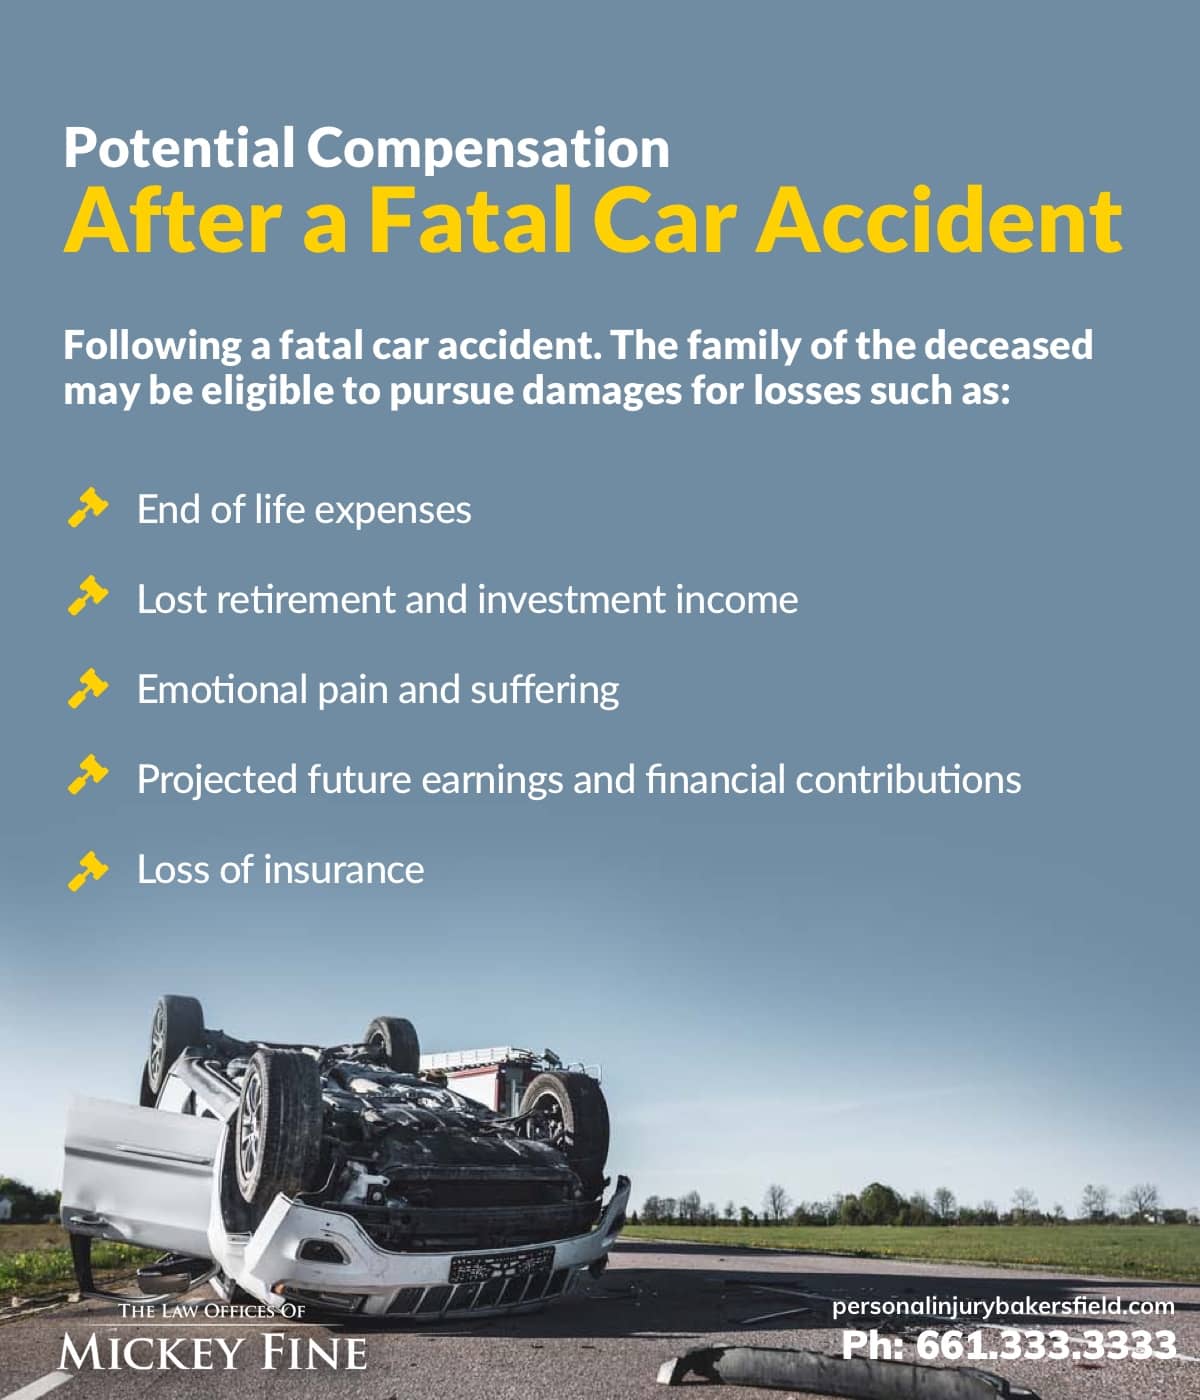 Potential compensation after a fatal car accident | The Law Offices of Mickey Fine